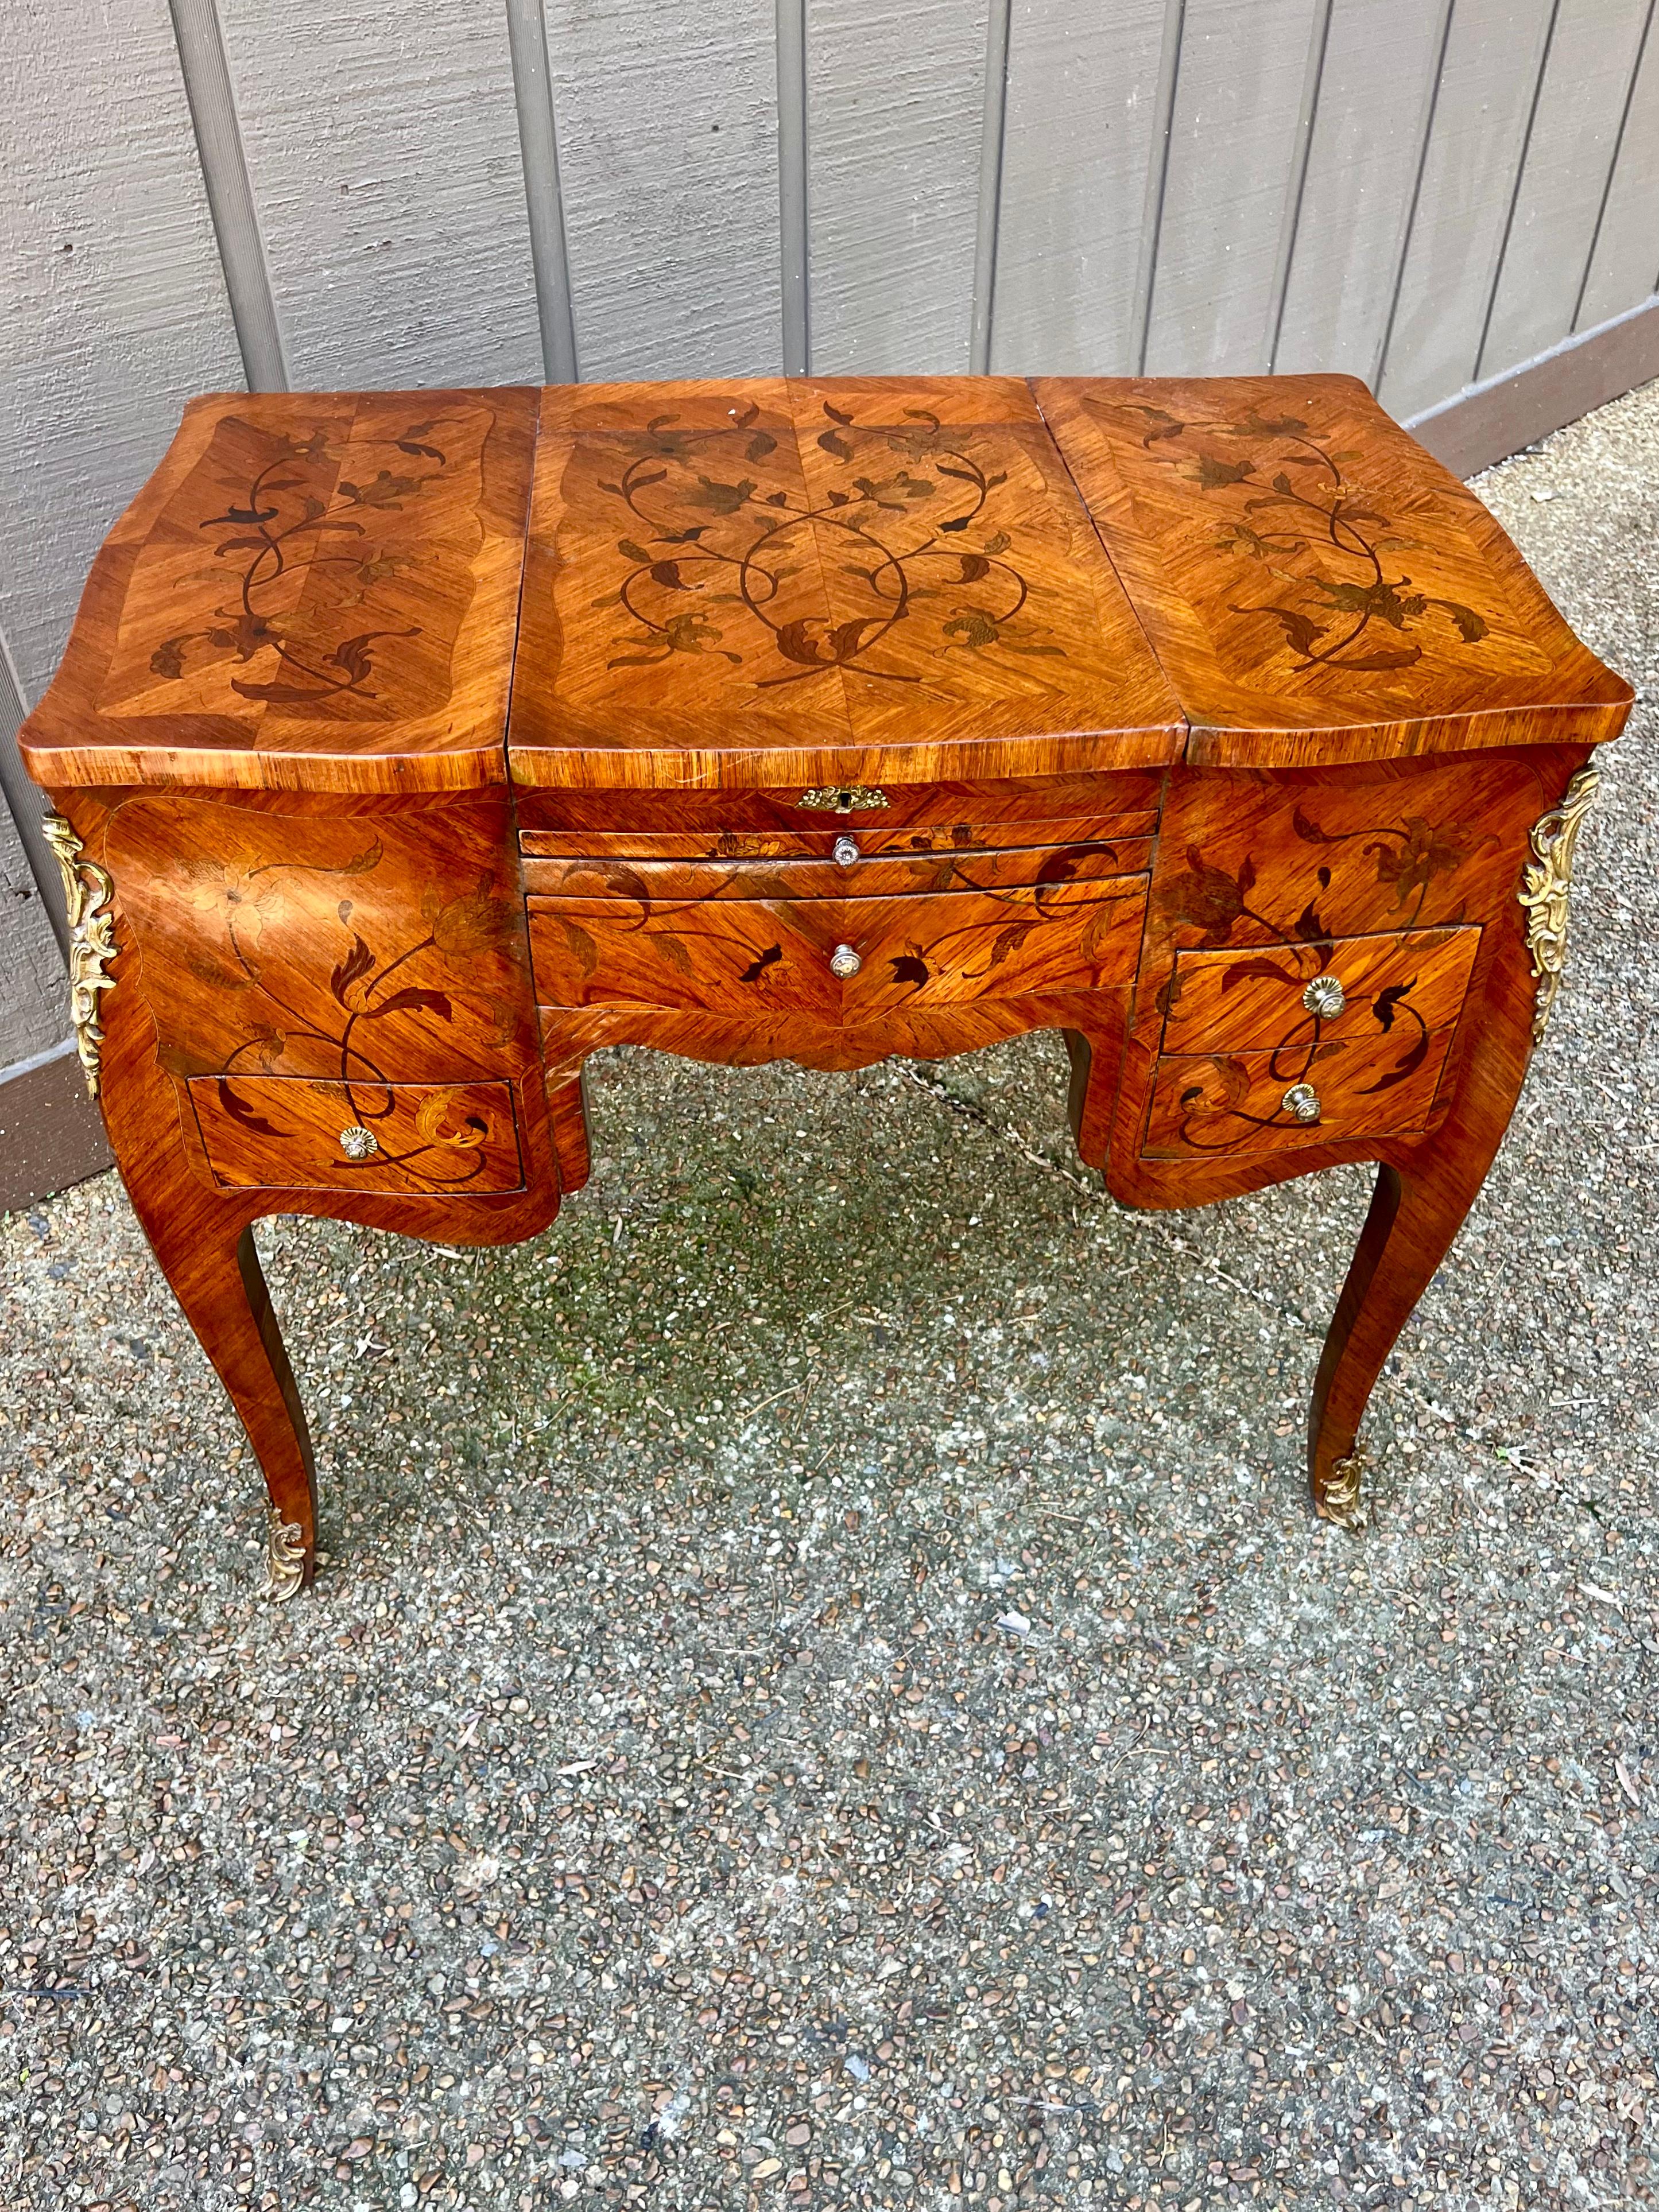 Louis Xv Transitional to LouisXvi Tulipwood Parquetry and Marquetry Floral Case  In Fair Condition For Sale In Nashville, TN